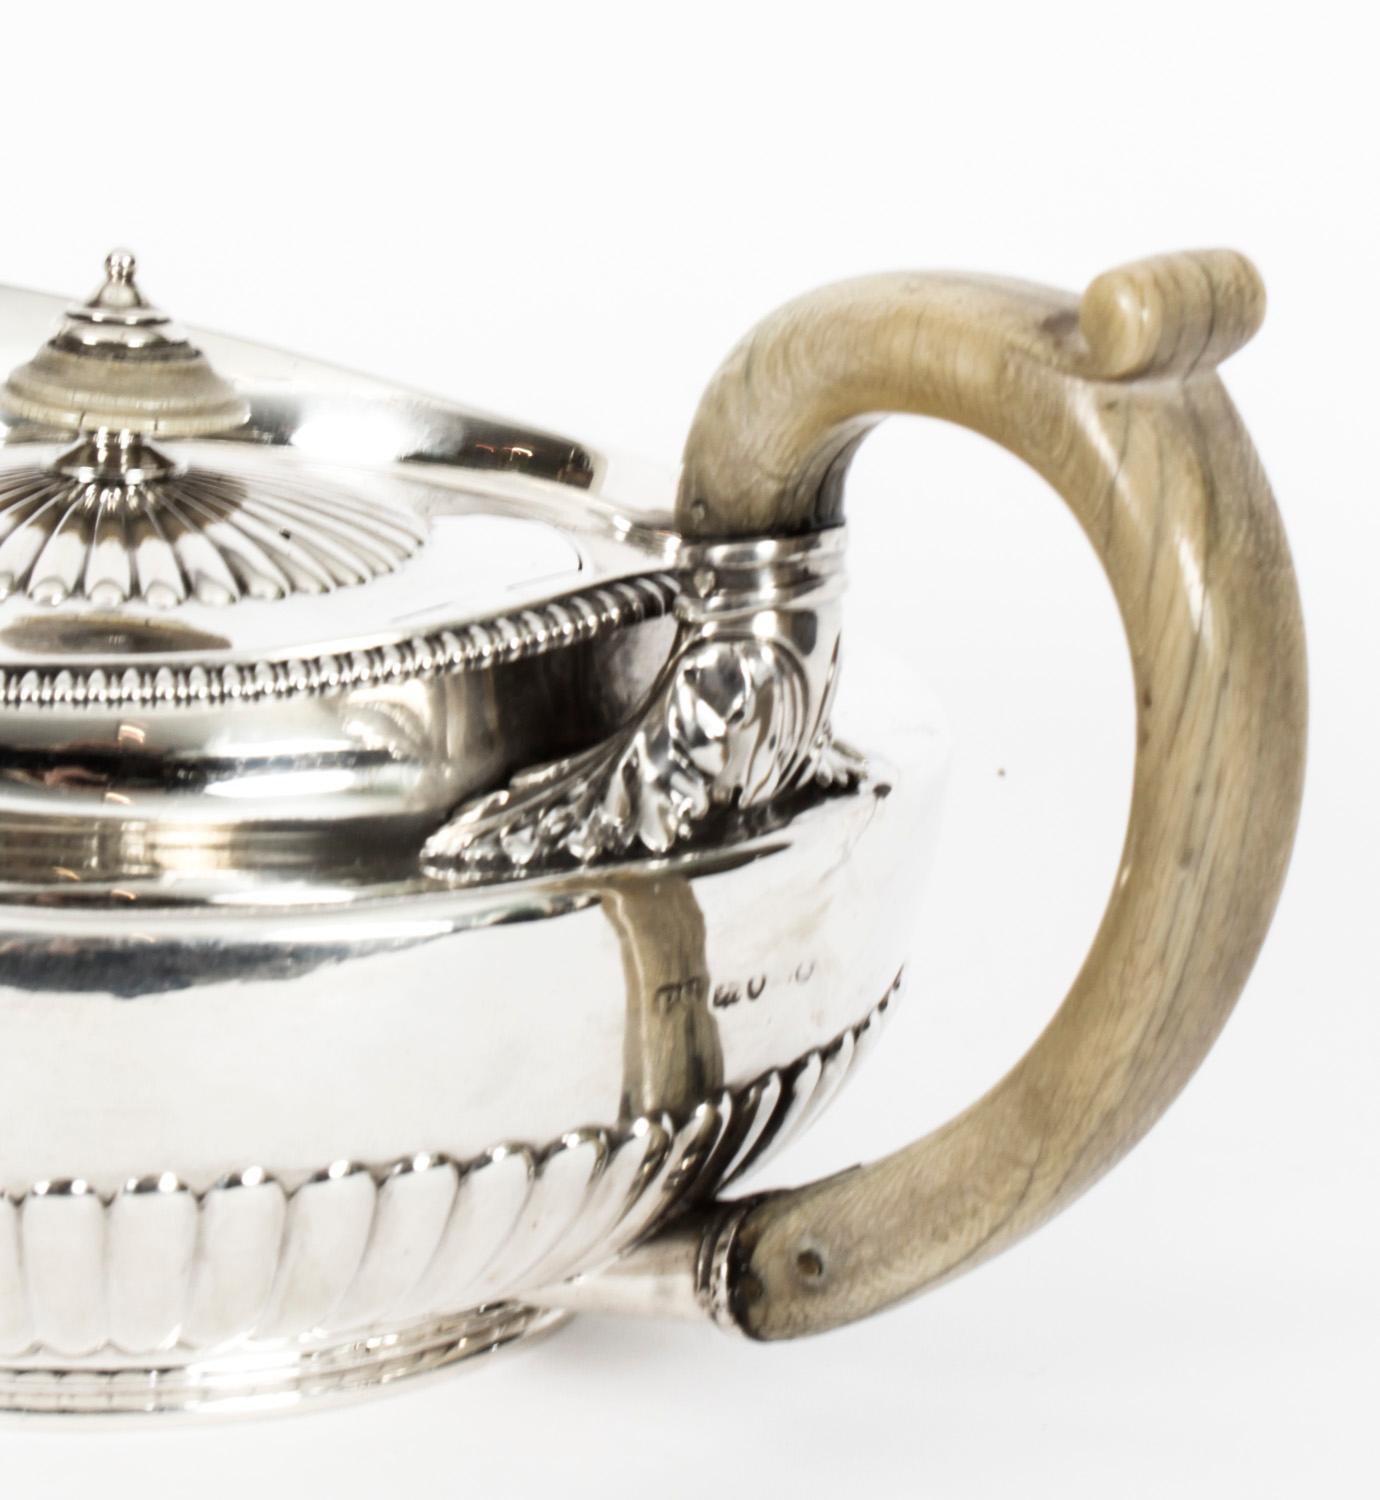 Antique Rare Georgian Sterling Silver Teapot by Paul Storr 1817, 19th Century For Sale 6